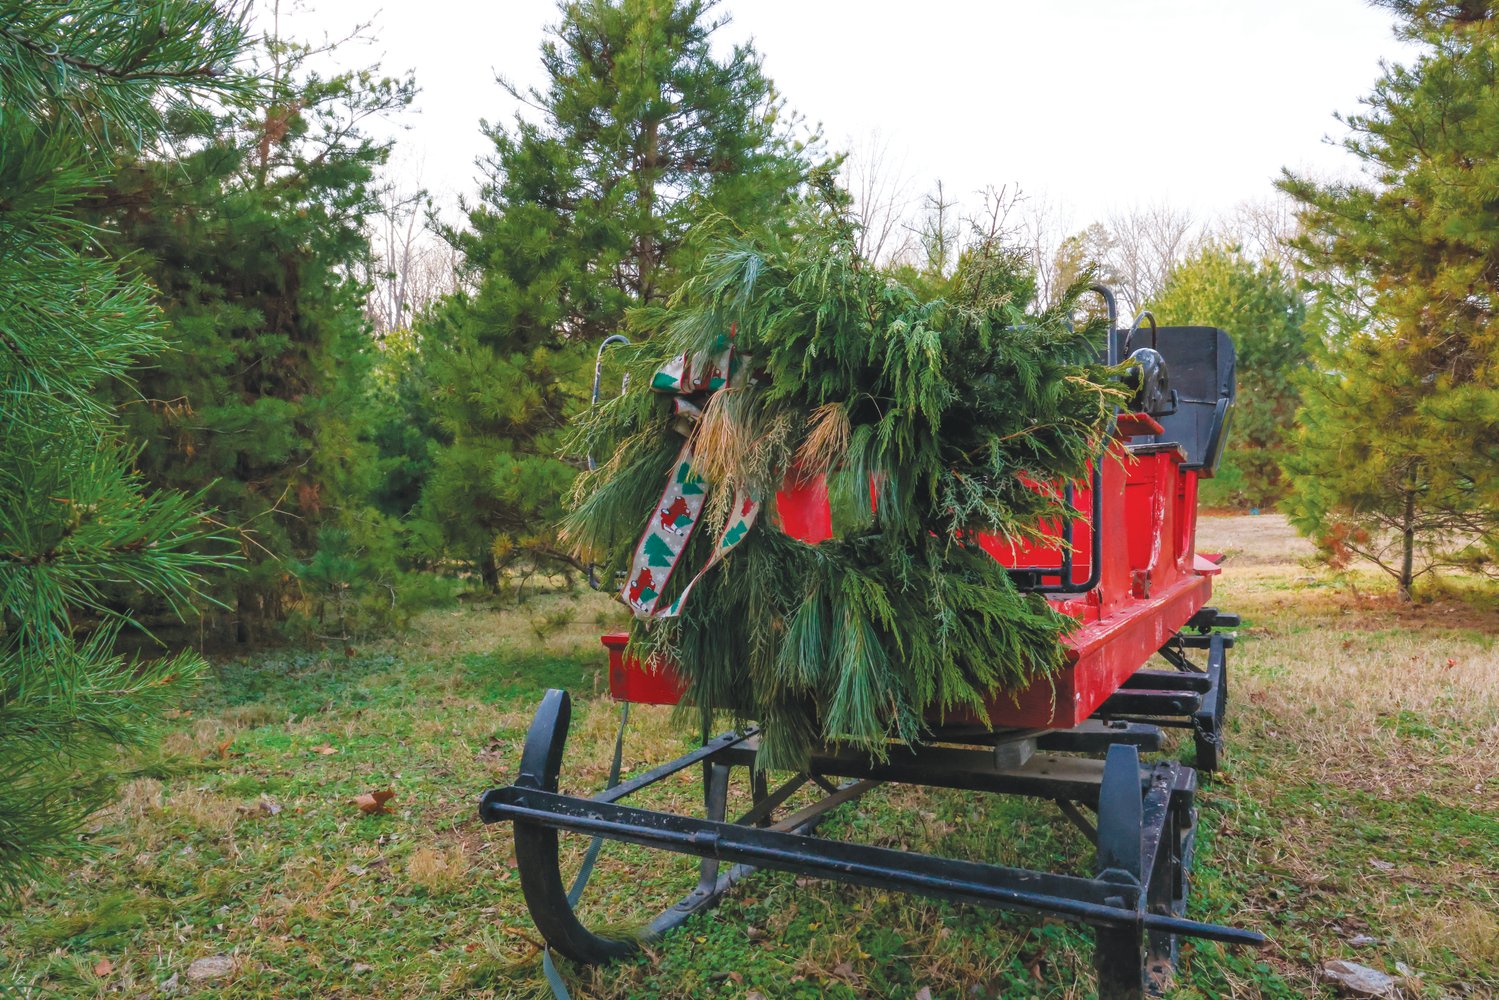 The grounds at Phillips Farm features a sleigh where customers can pose among growing Christmas trees.